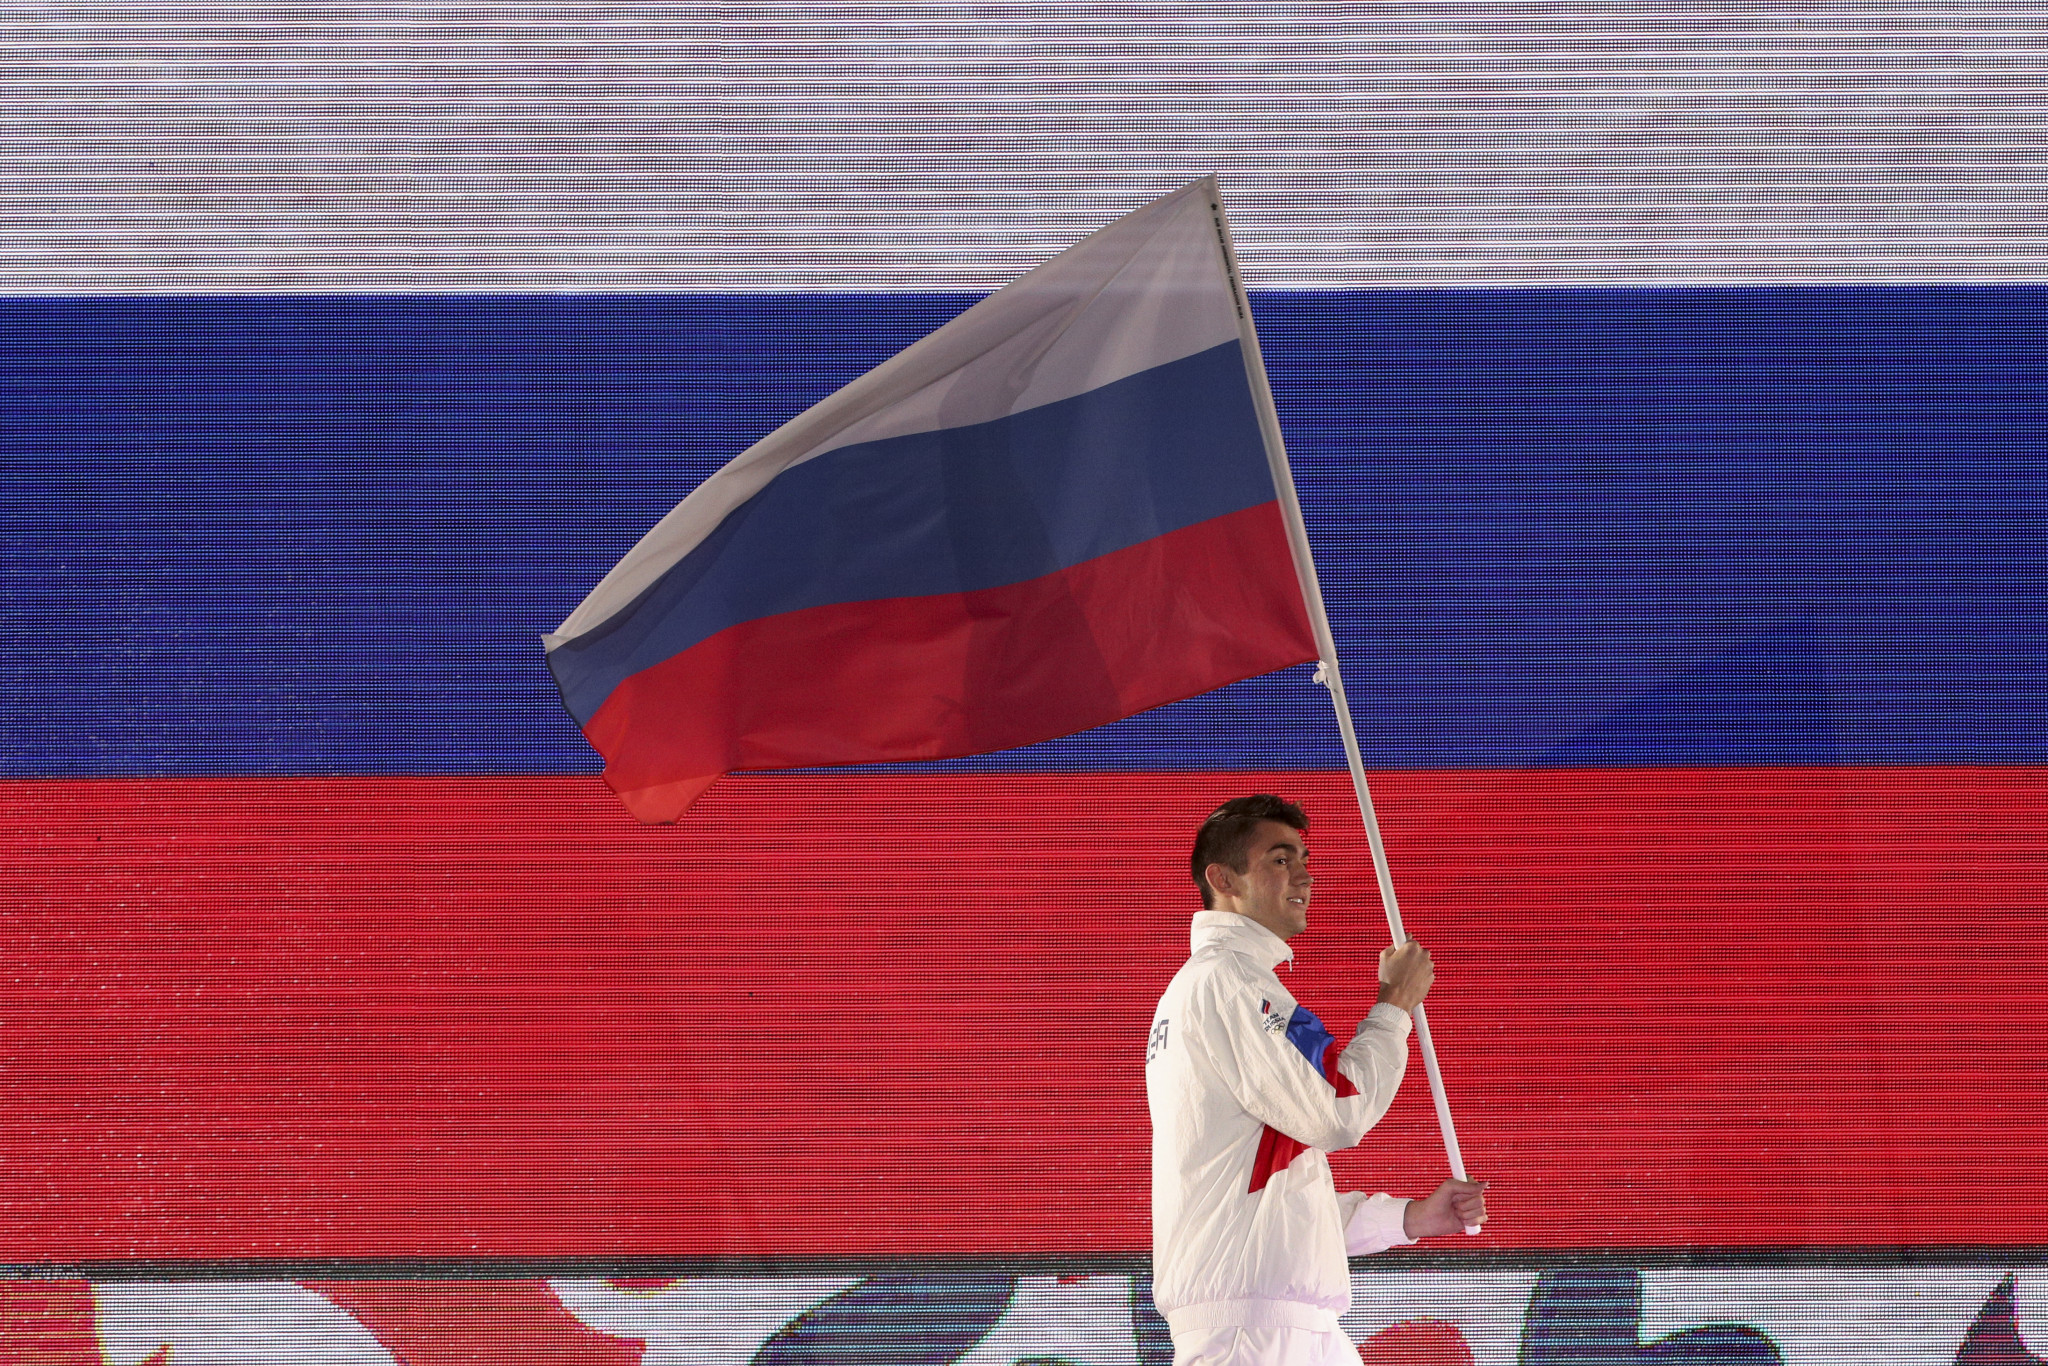 The Russian flag is currently banned at most international events, but is being flown at the Russian-Chinese Youth Summer Games in Chongqing ©Getty Images